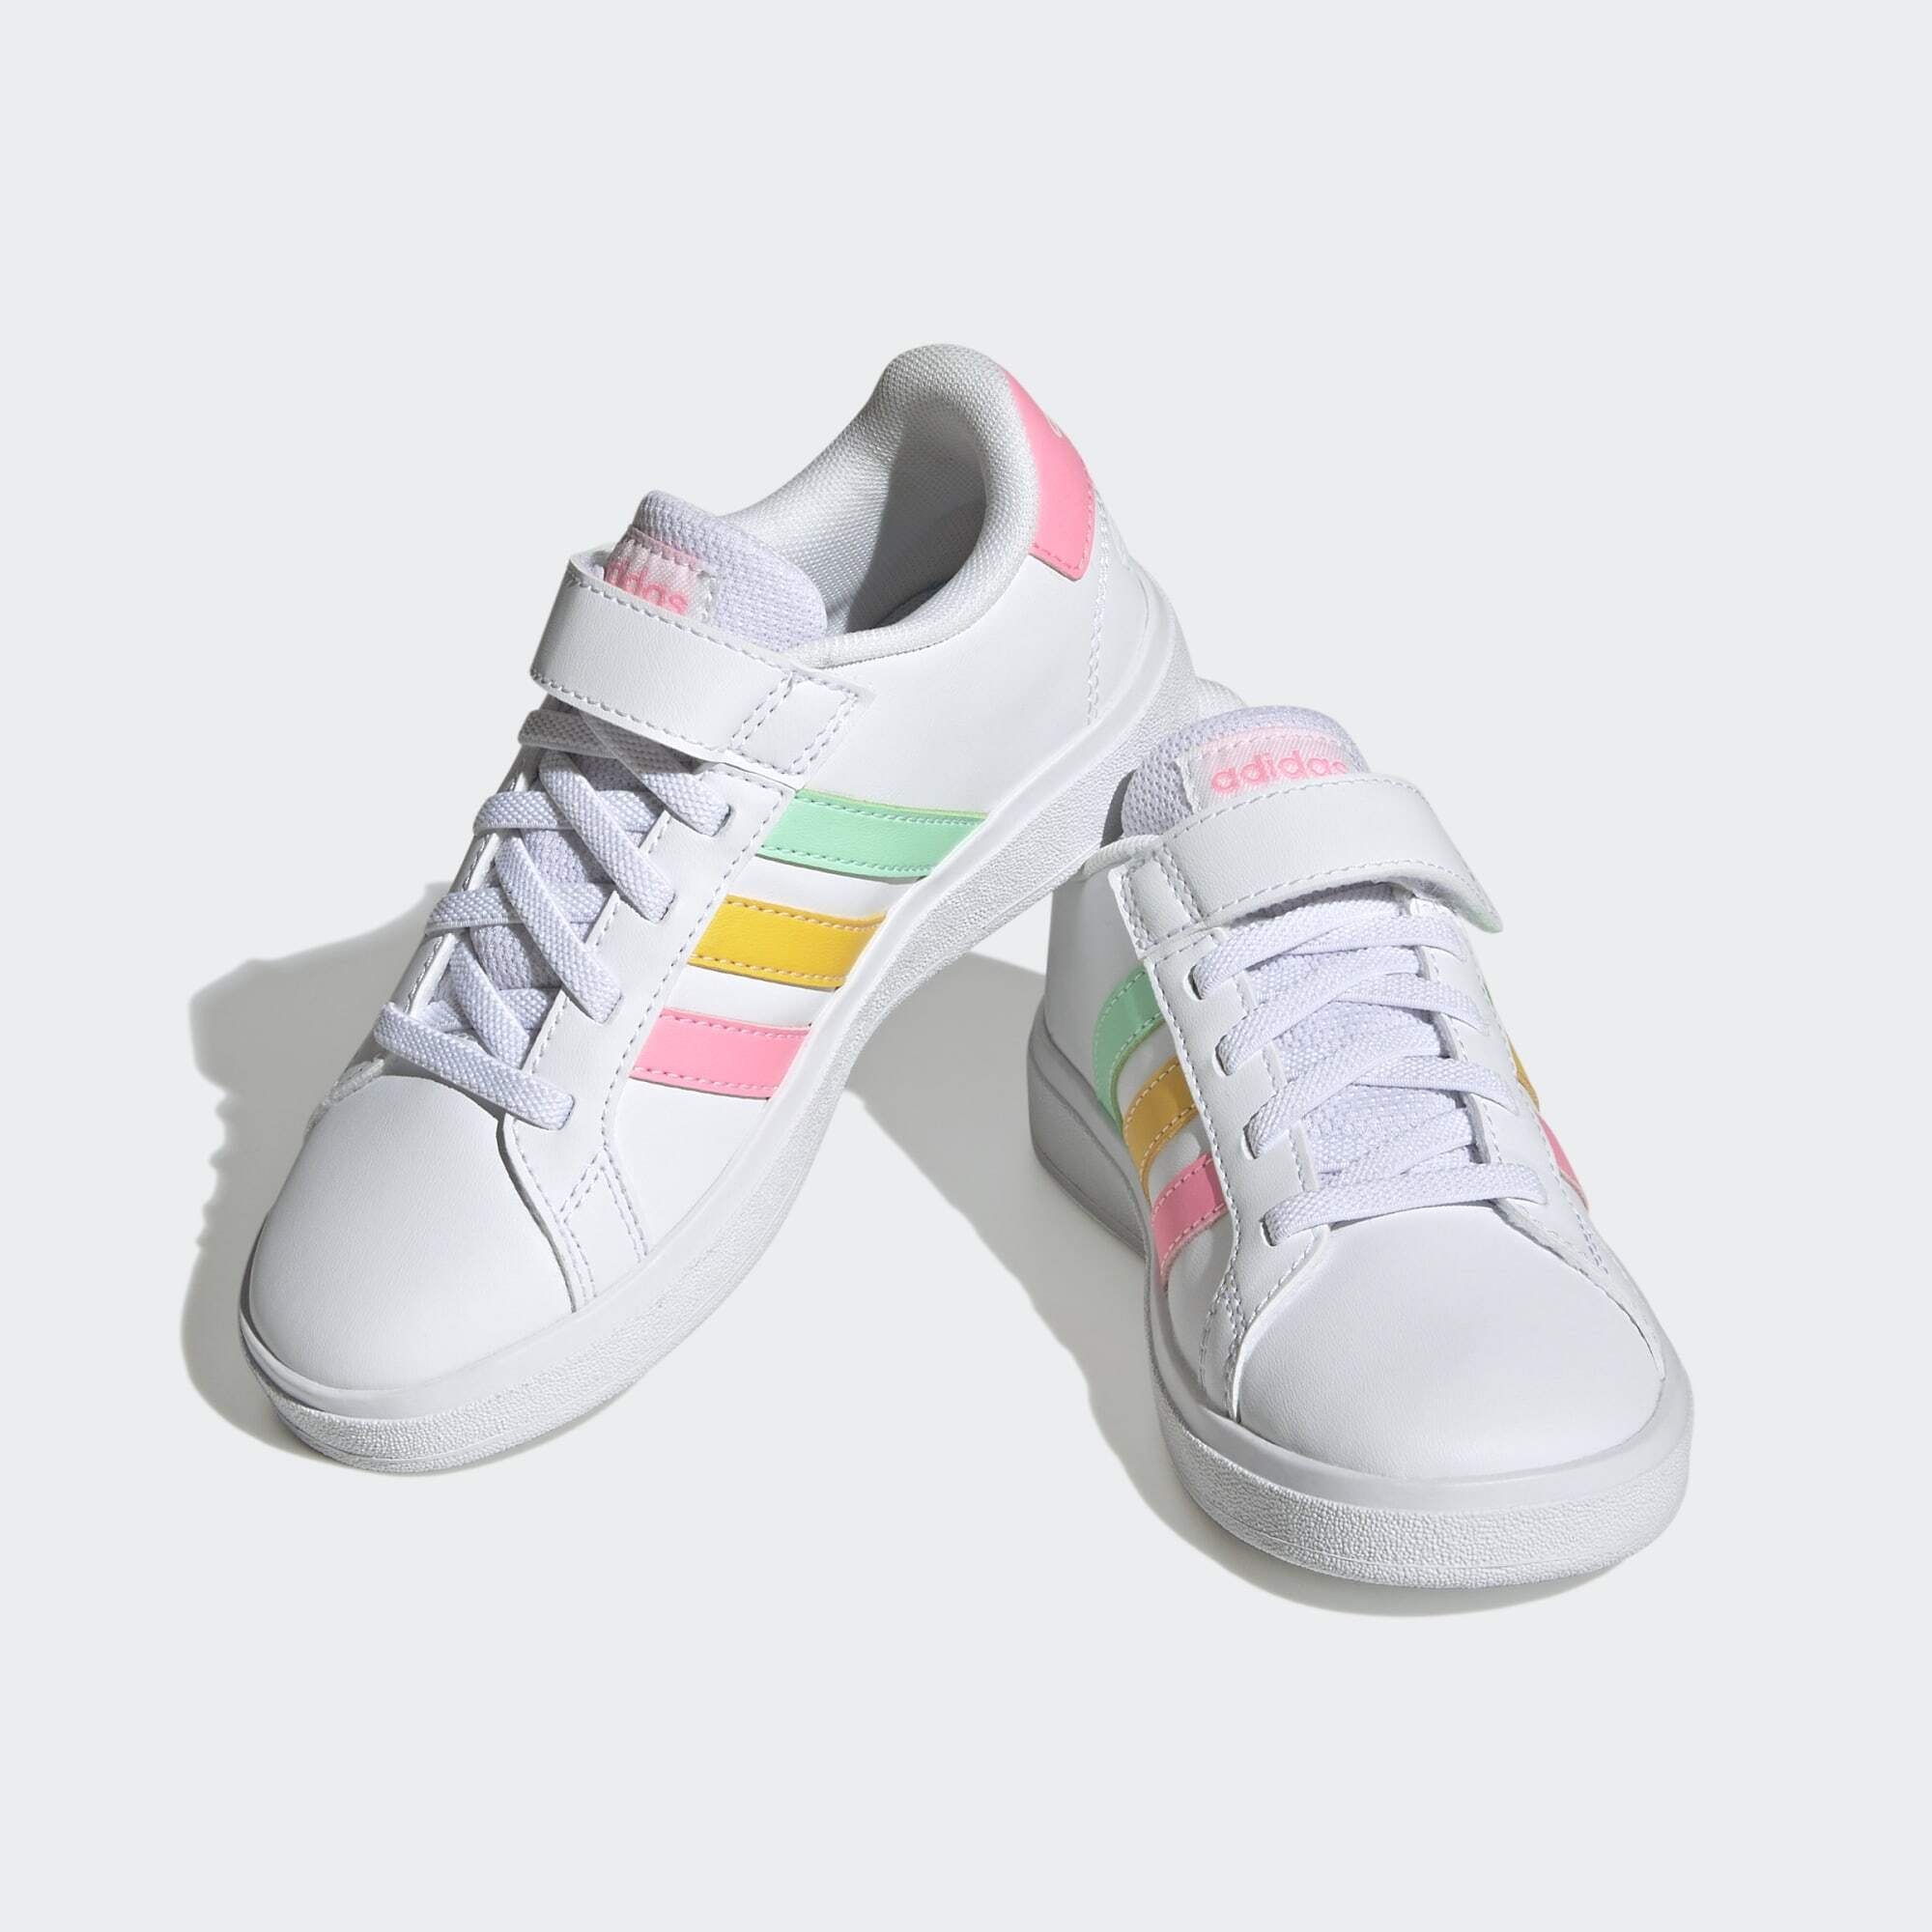 adidas Sportswear GRAND / White Mint Cloud / AND Sneaker COURT COURT Pulse Pink LACE TOP STRAP ELASTIC SCHUH Beam